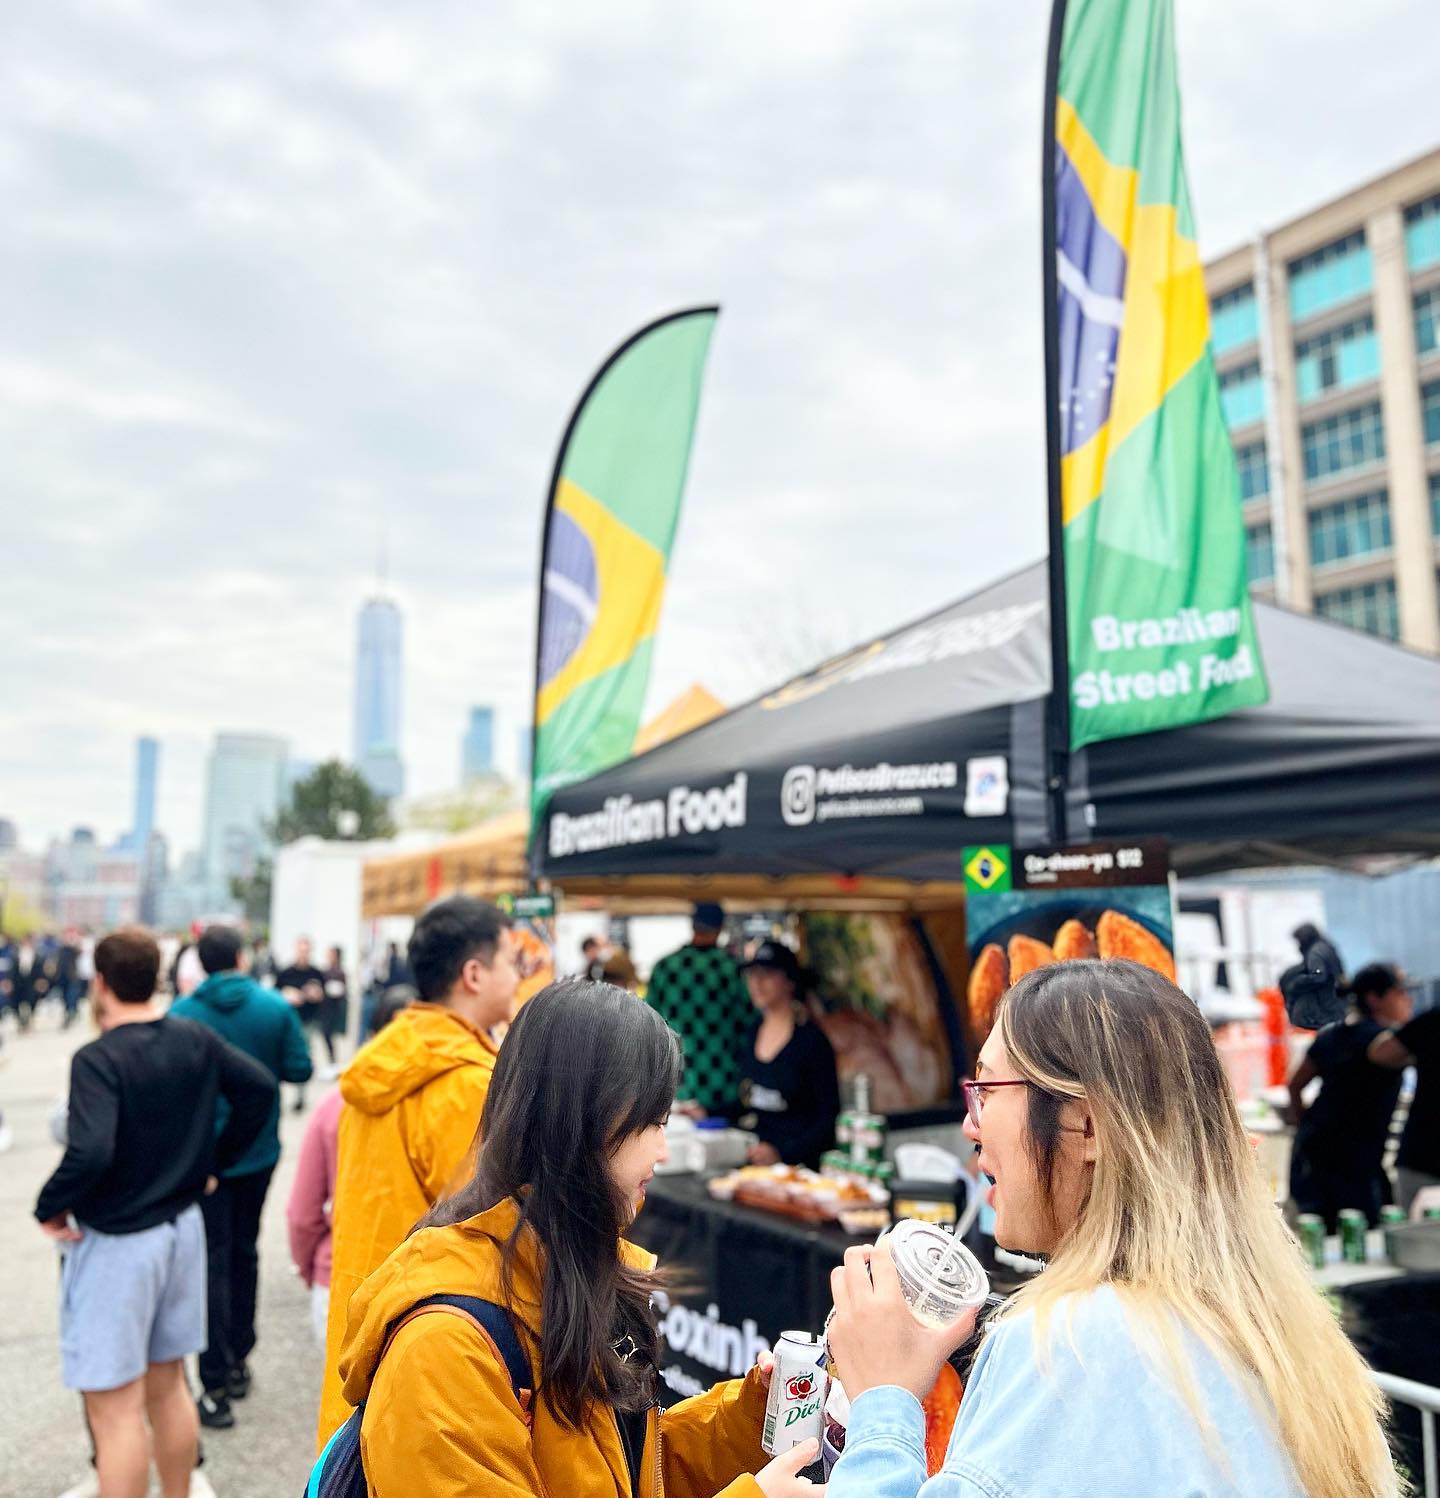 Today our stop is in Jersey City, NJ till 6:00pm. 🔥 You can also order online through @ubereats and avoid lines with UberEats pickup. 
.
.
.
#petiscobrazuca #smorgasburg #newjersey #jerseycity #coxinhas #delivery #streetfair #brazilianfood #brazil